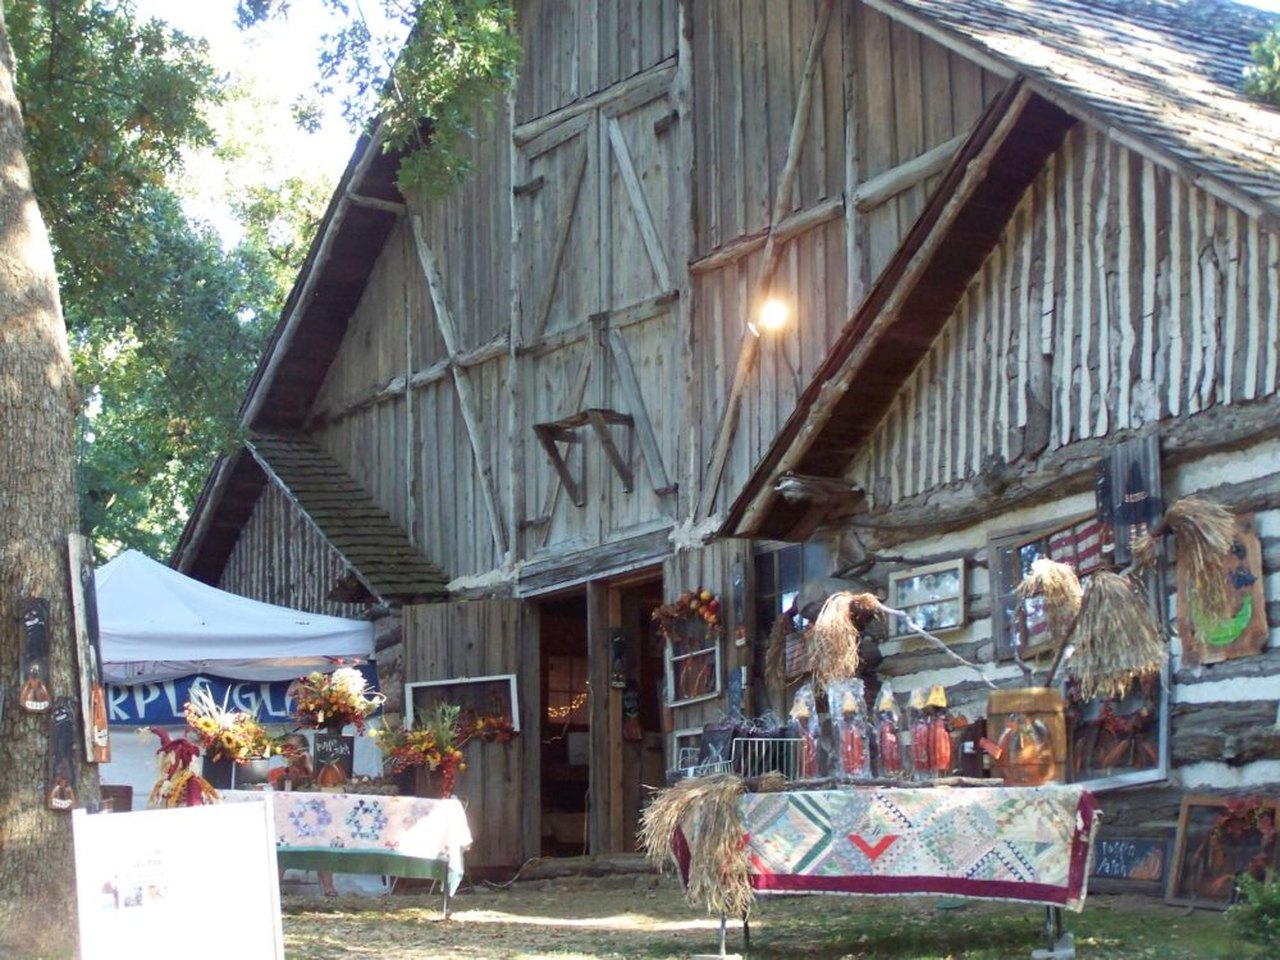 Brush Creek Bazaar The Outdoor Festival And Market In Oklahoma You Don